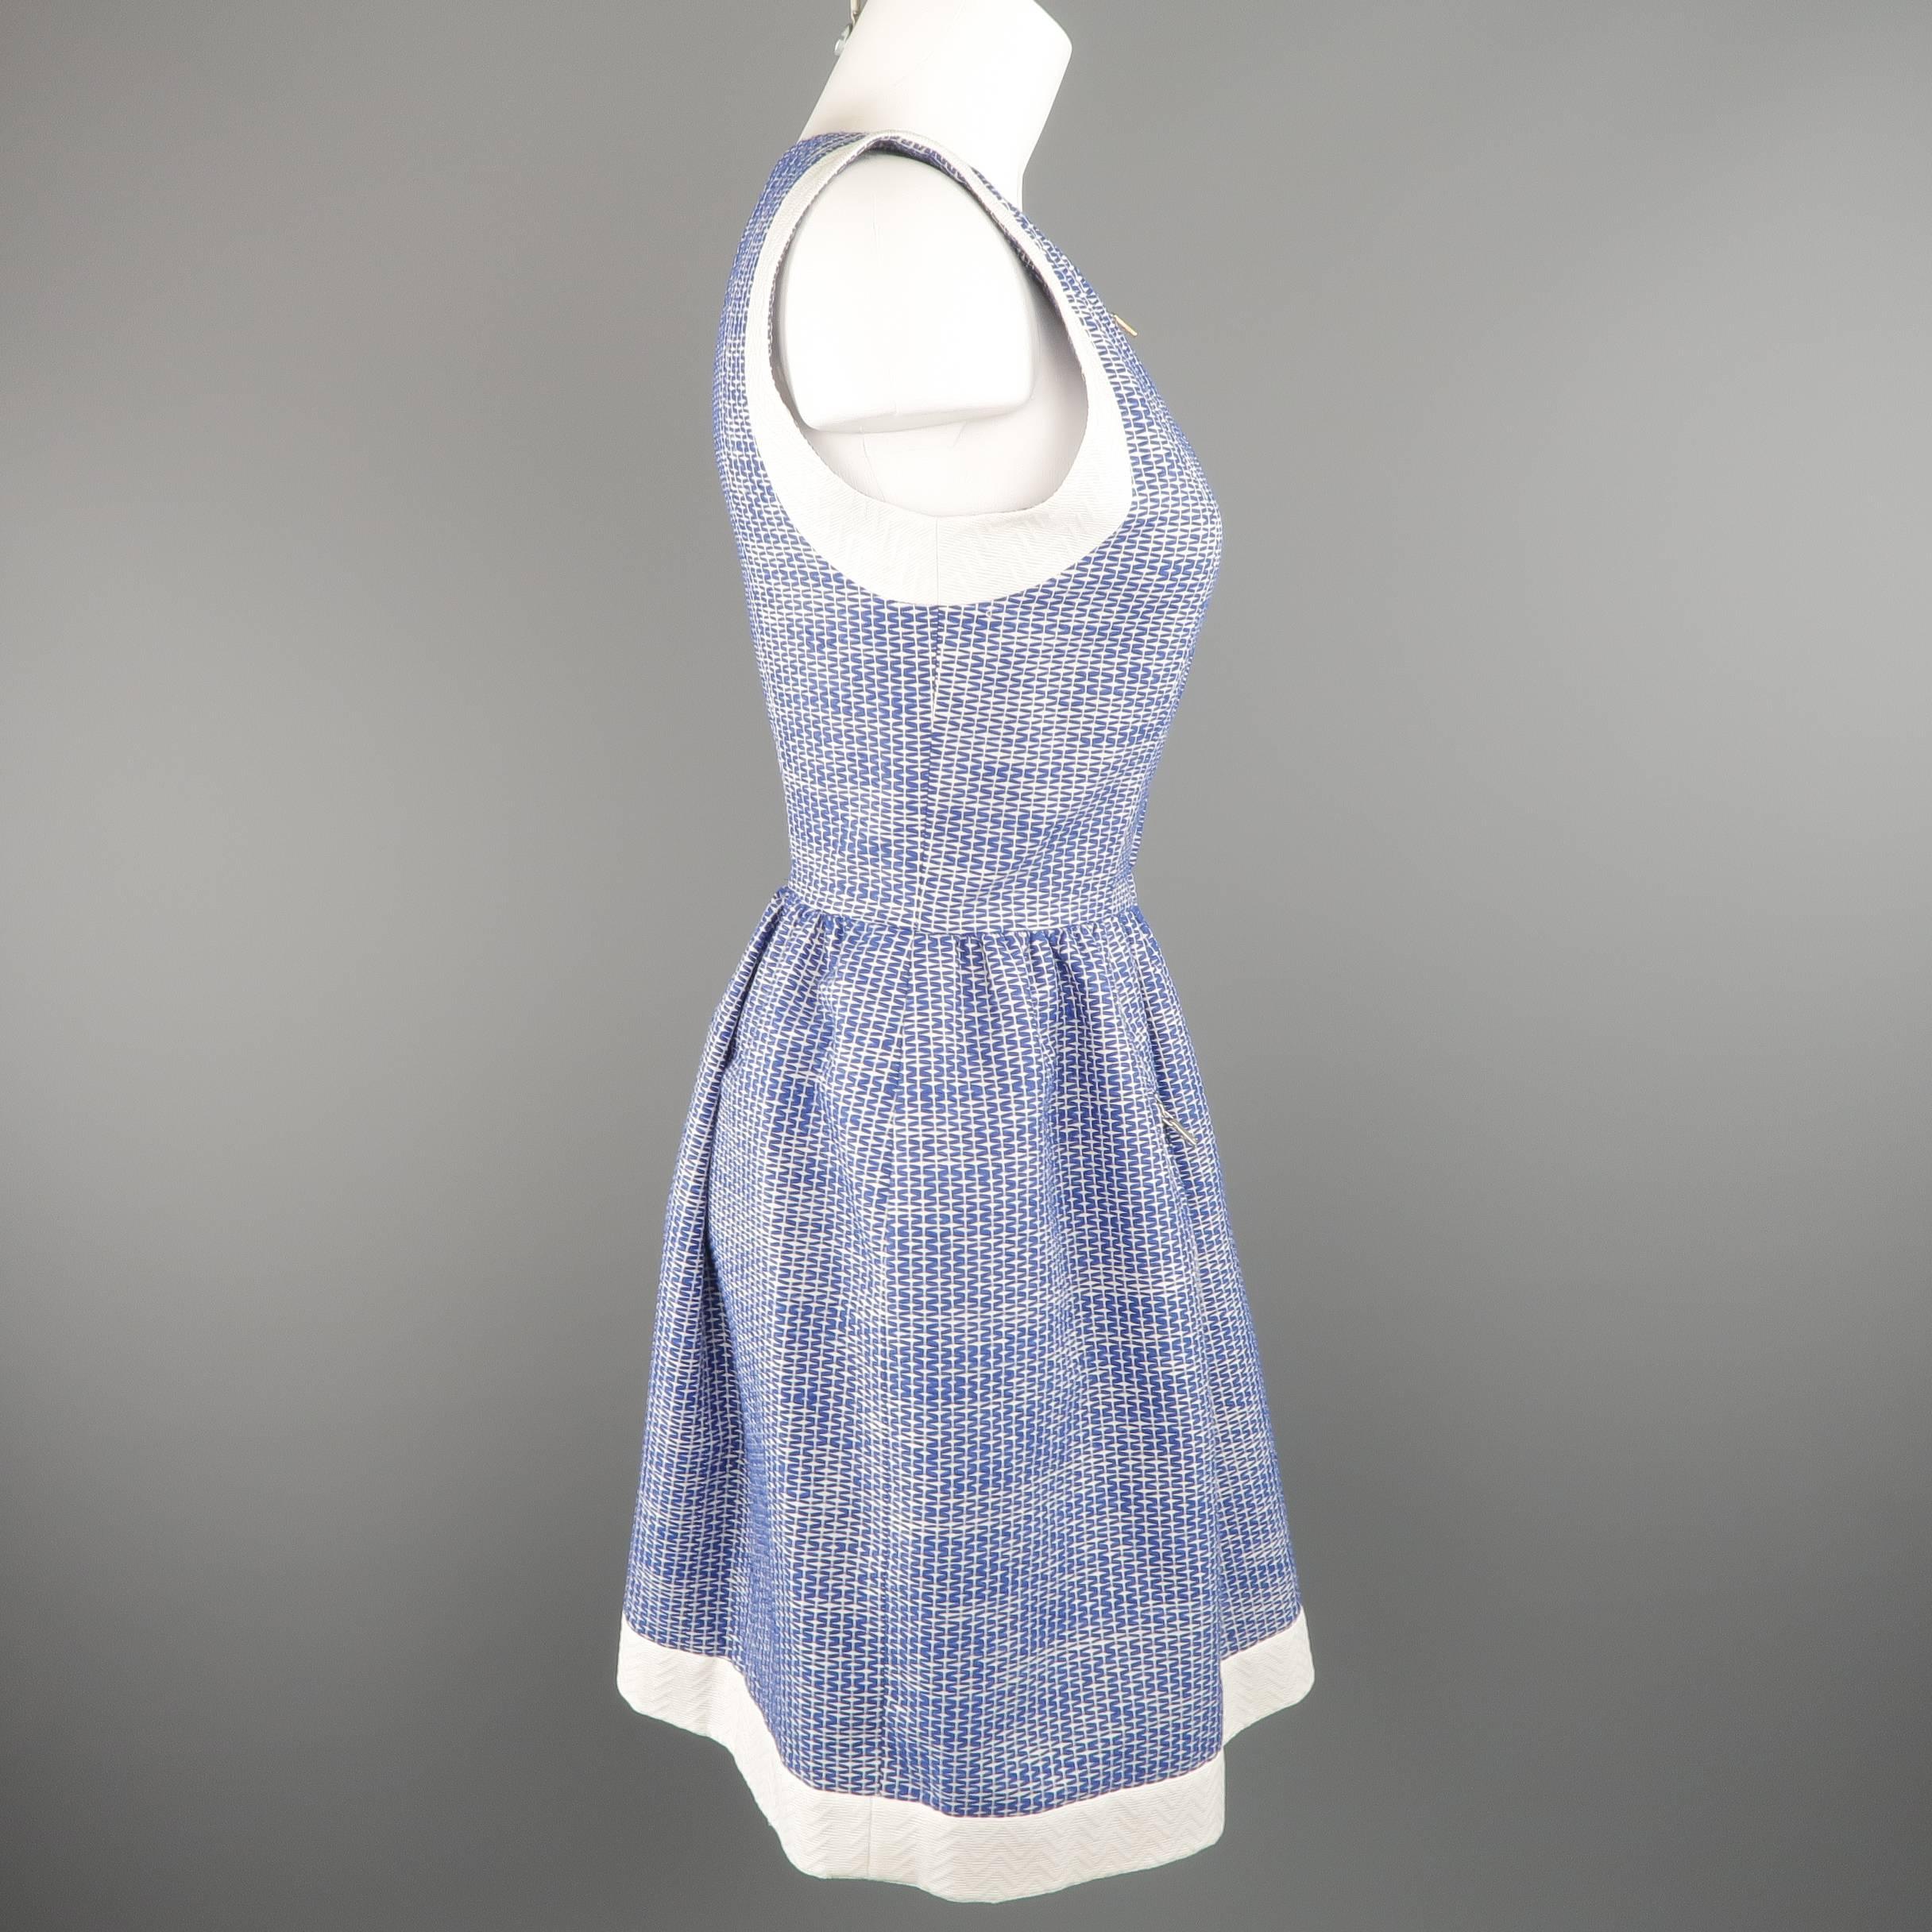 Chanel Dress Blue and White Zip Dress Size 4 US - 36 FR 2